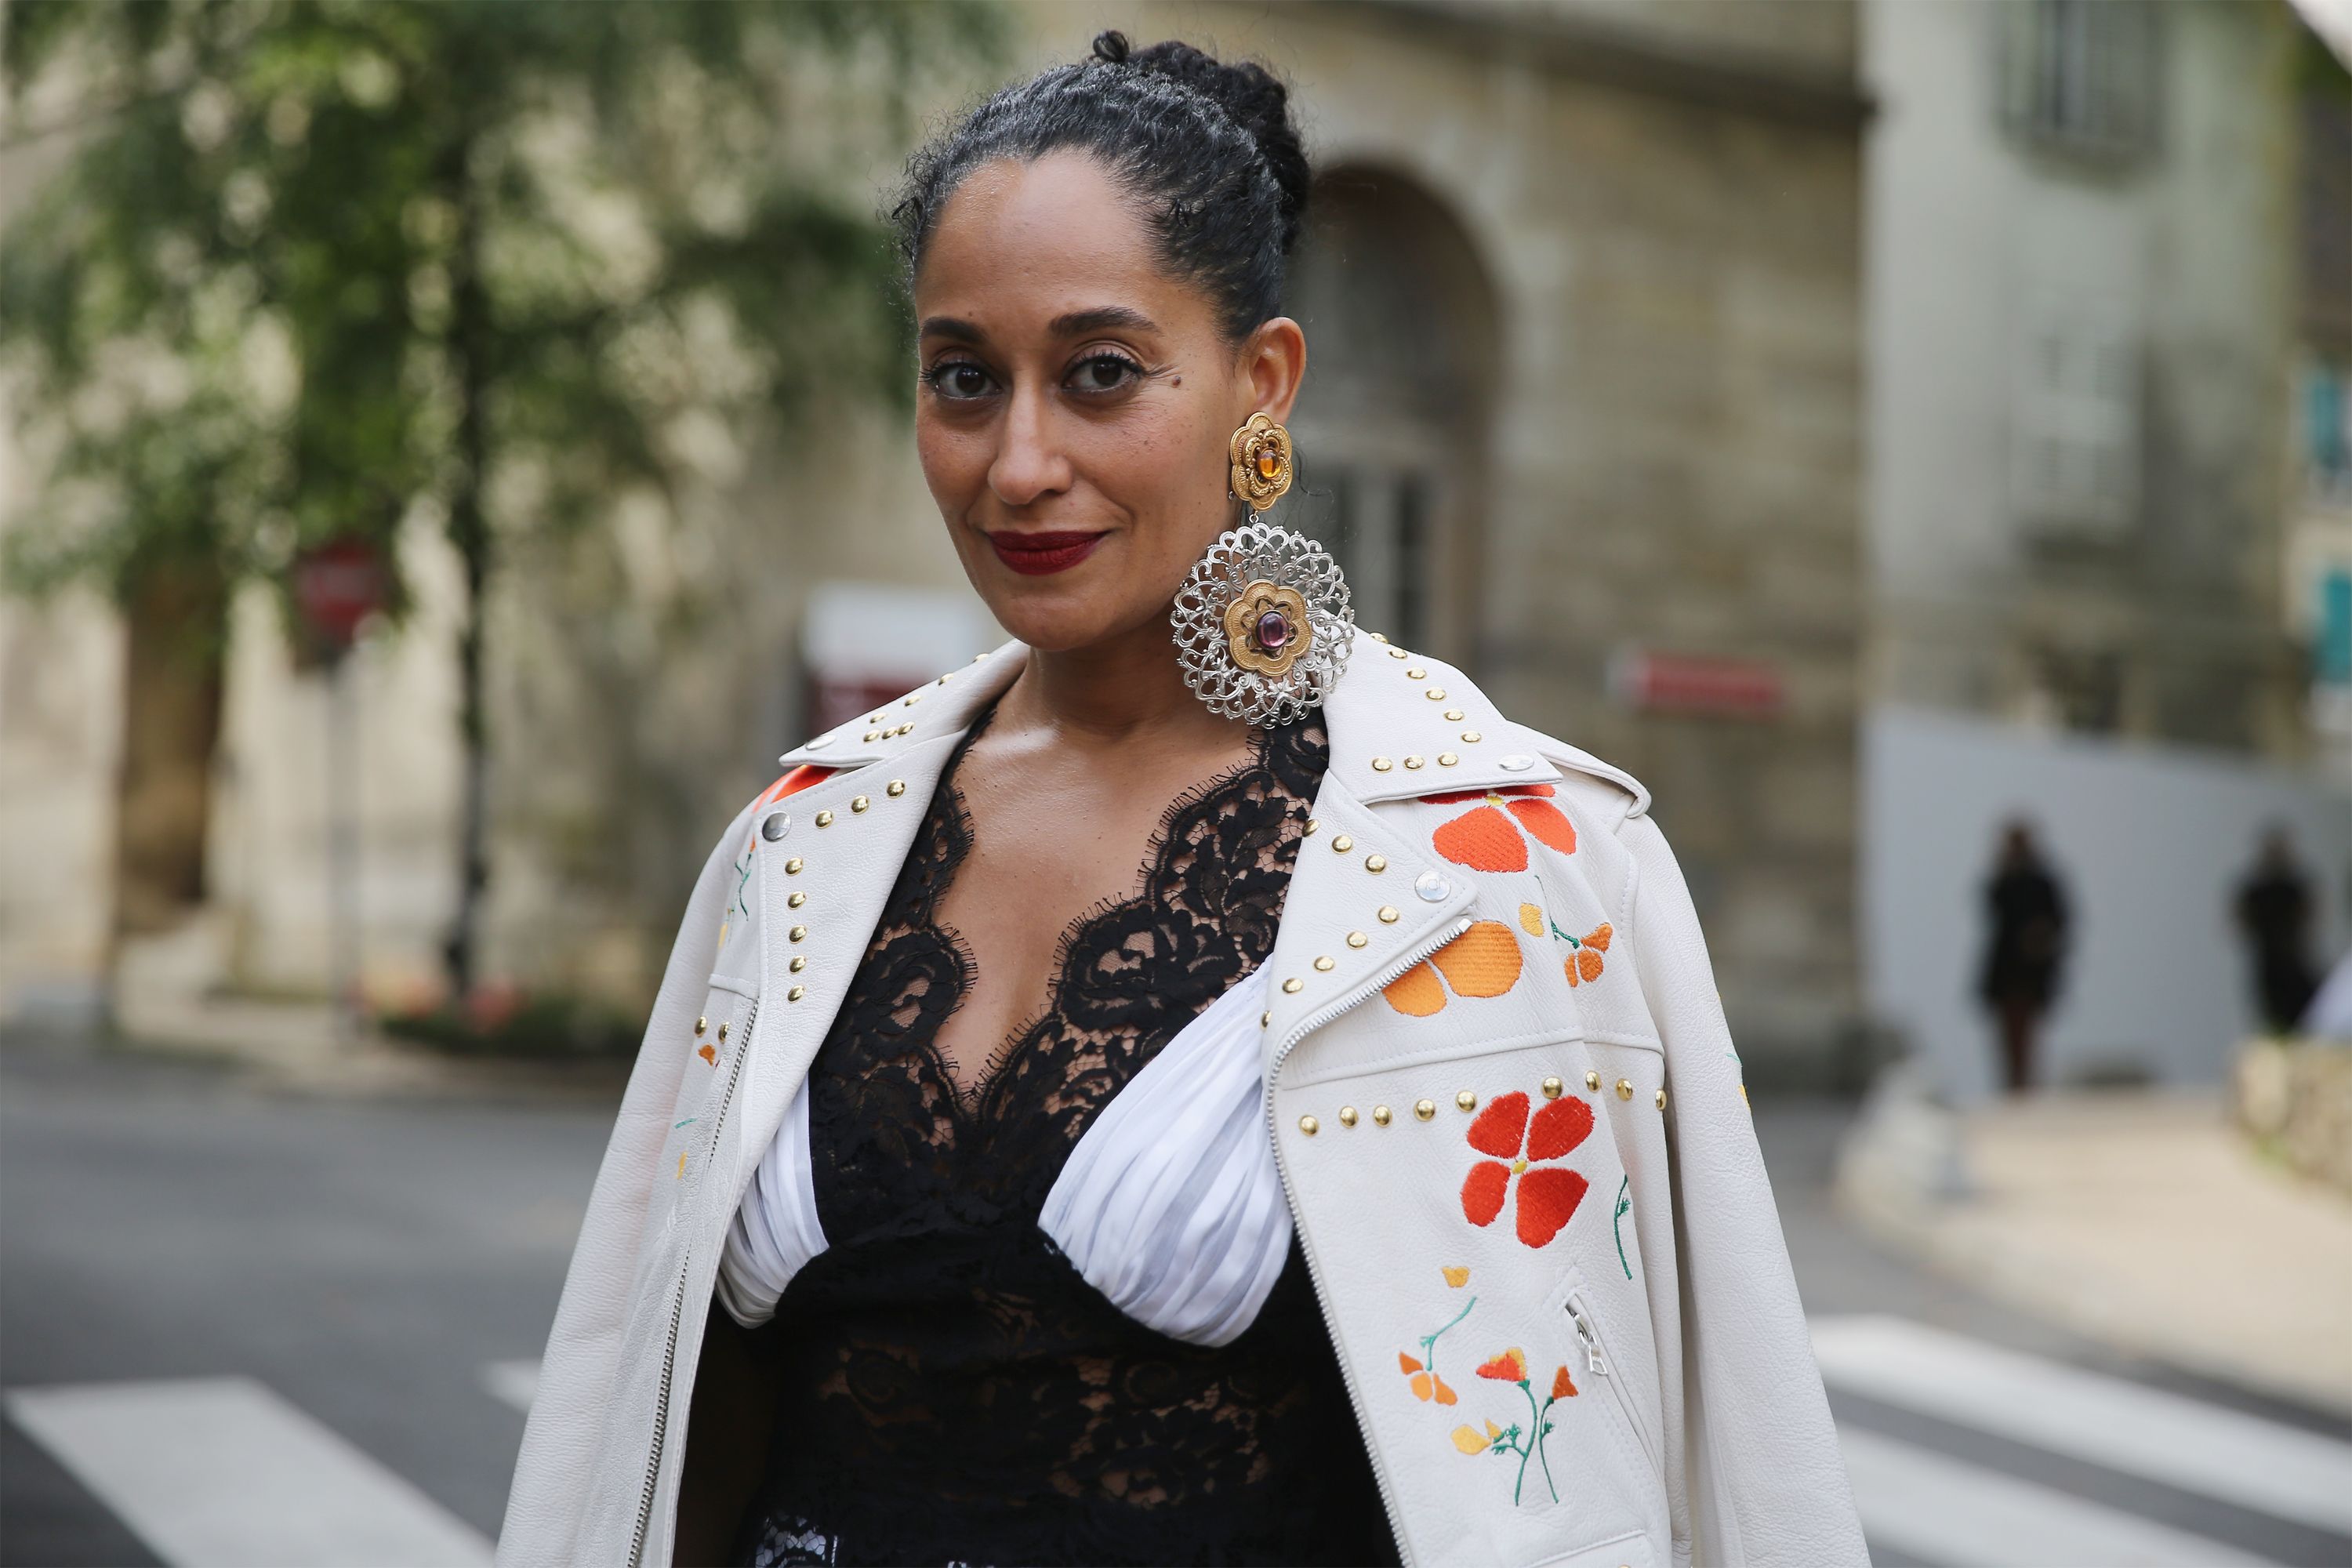 Tracee Ellis Ross at the Rodarte Haute Couture fashion show on July 2, 2017 | Photo: Getty Images